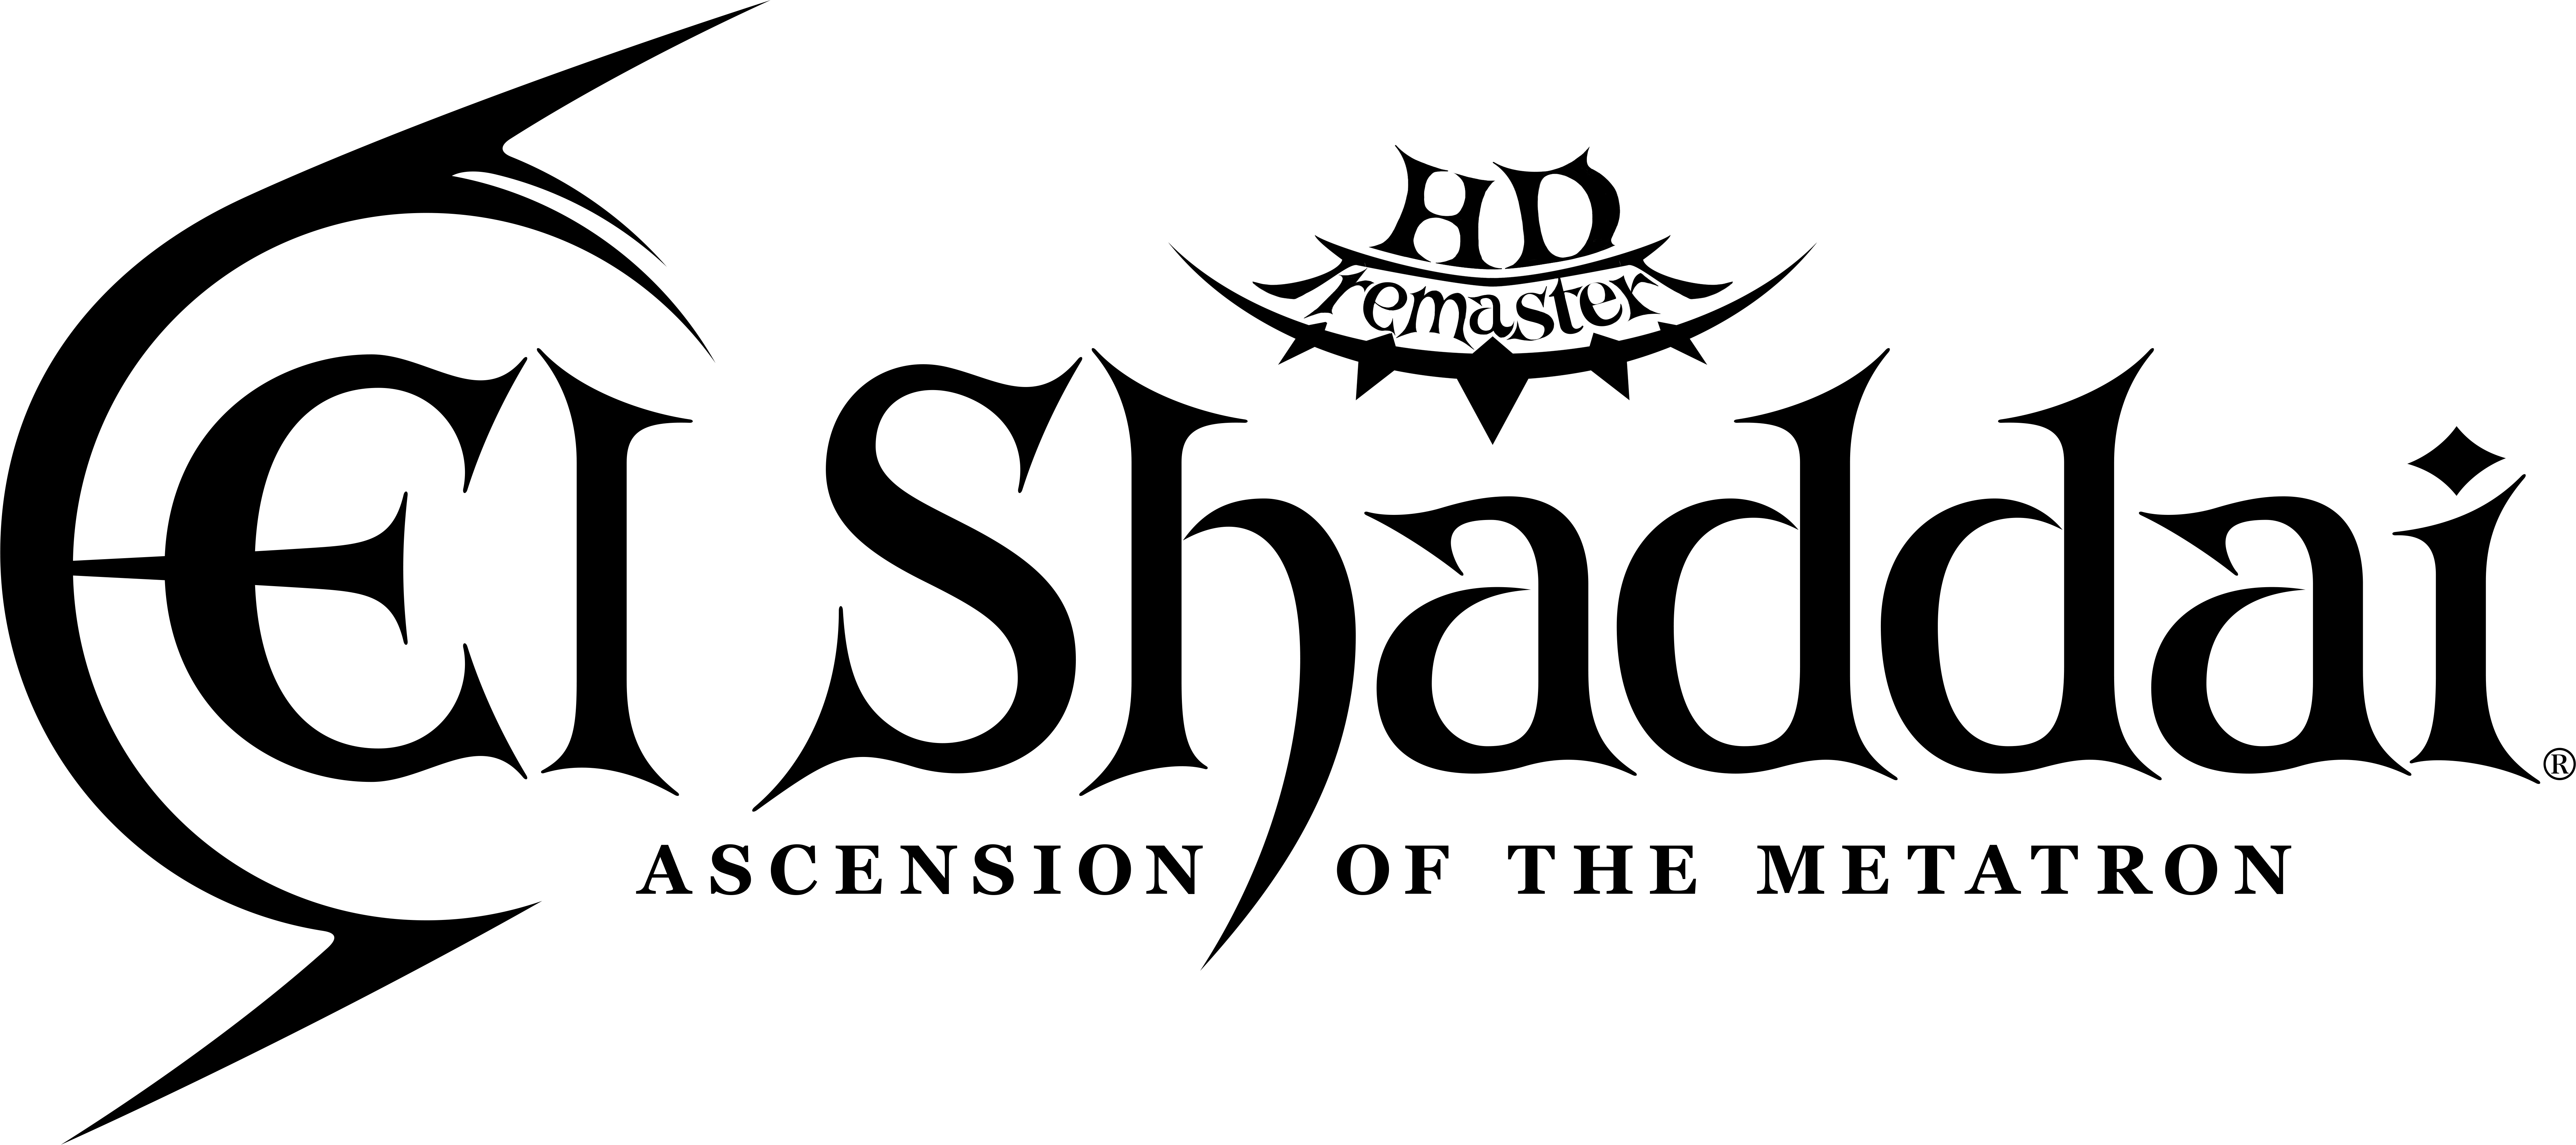 October 28, 2021 Update! · El Shaddai ASCENSION OF THE METATRON HD Remaster  update for 28 October 2021 · SteamDB